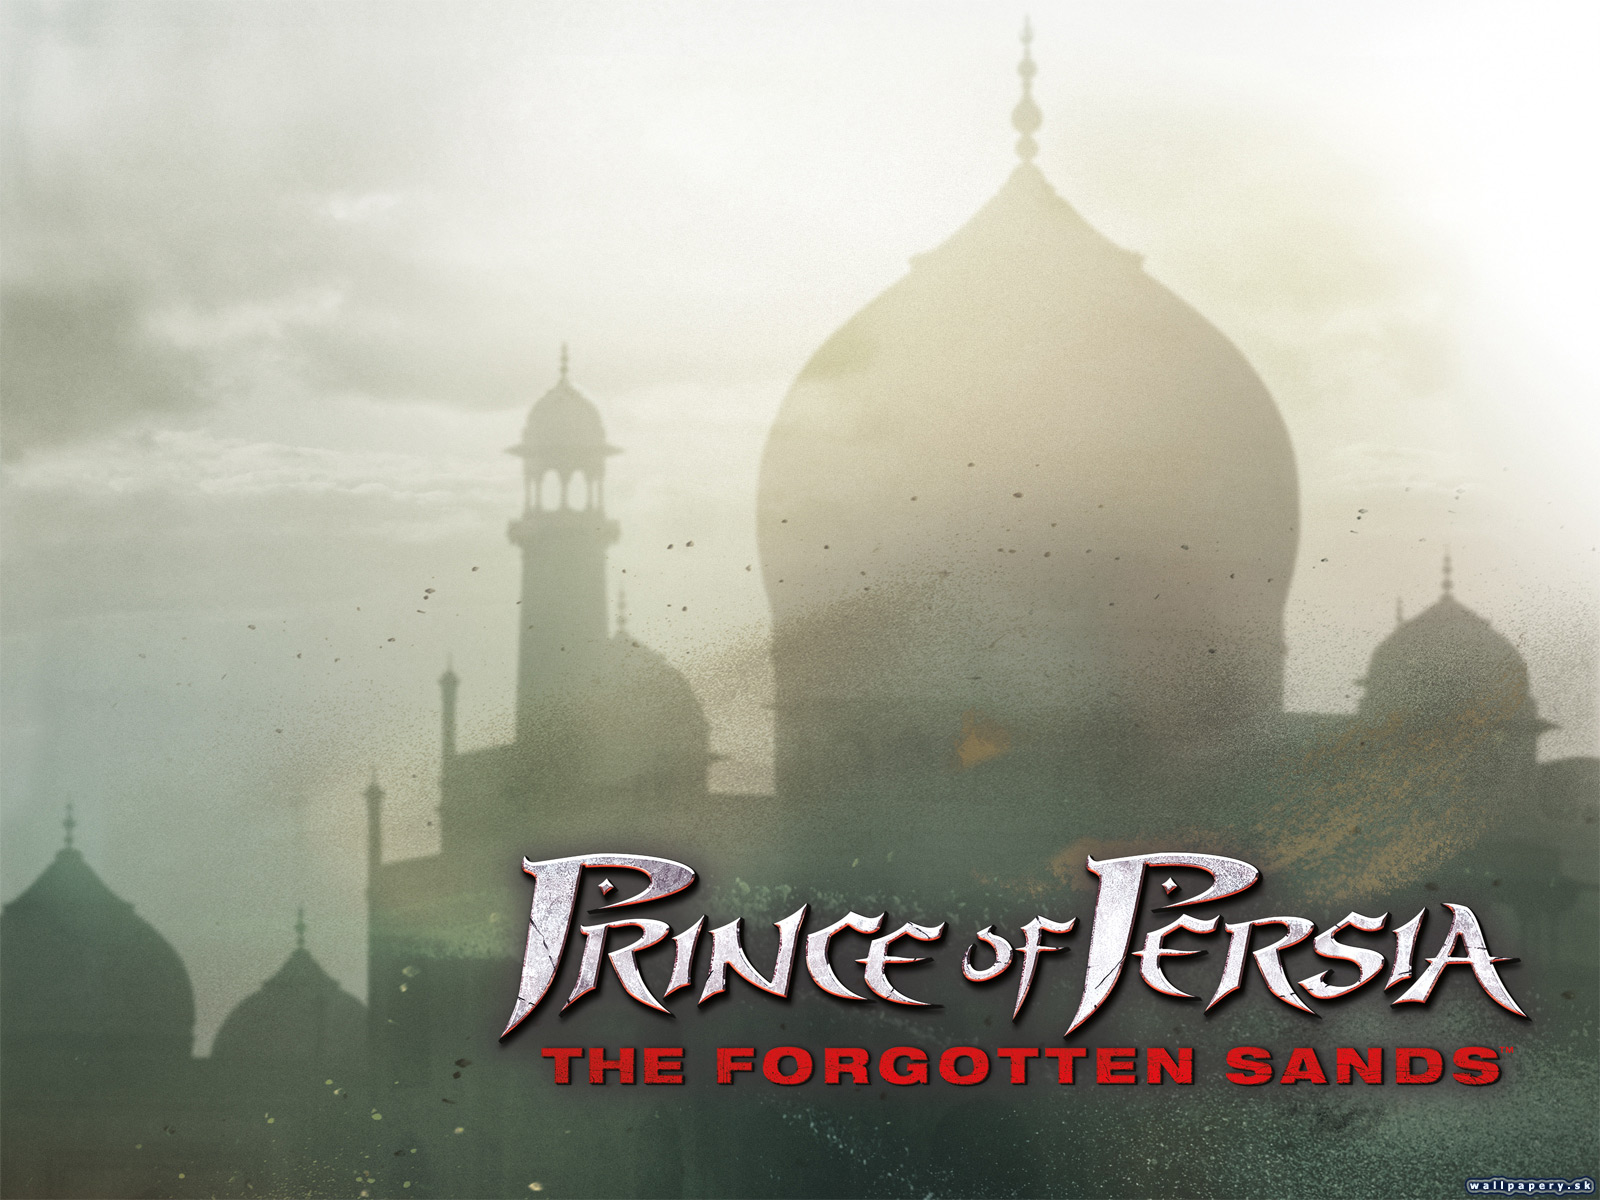 Prince of Persia: The Forgotten Sands - wallpaper 4